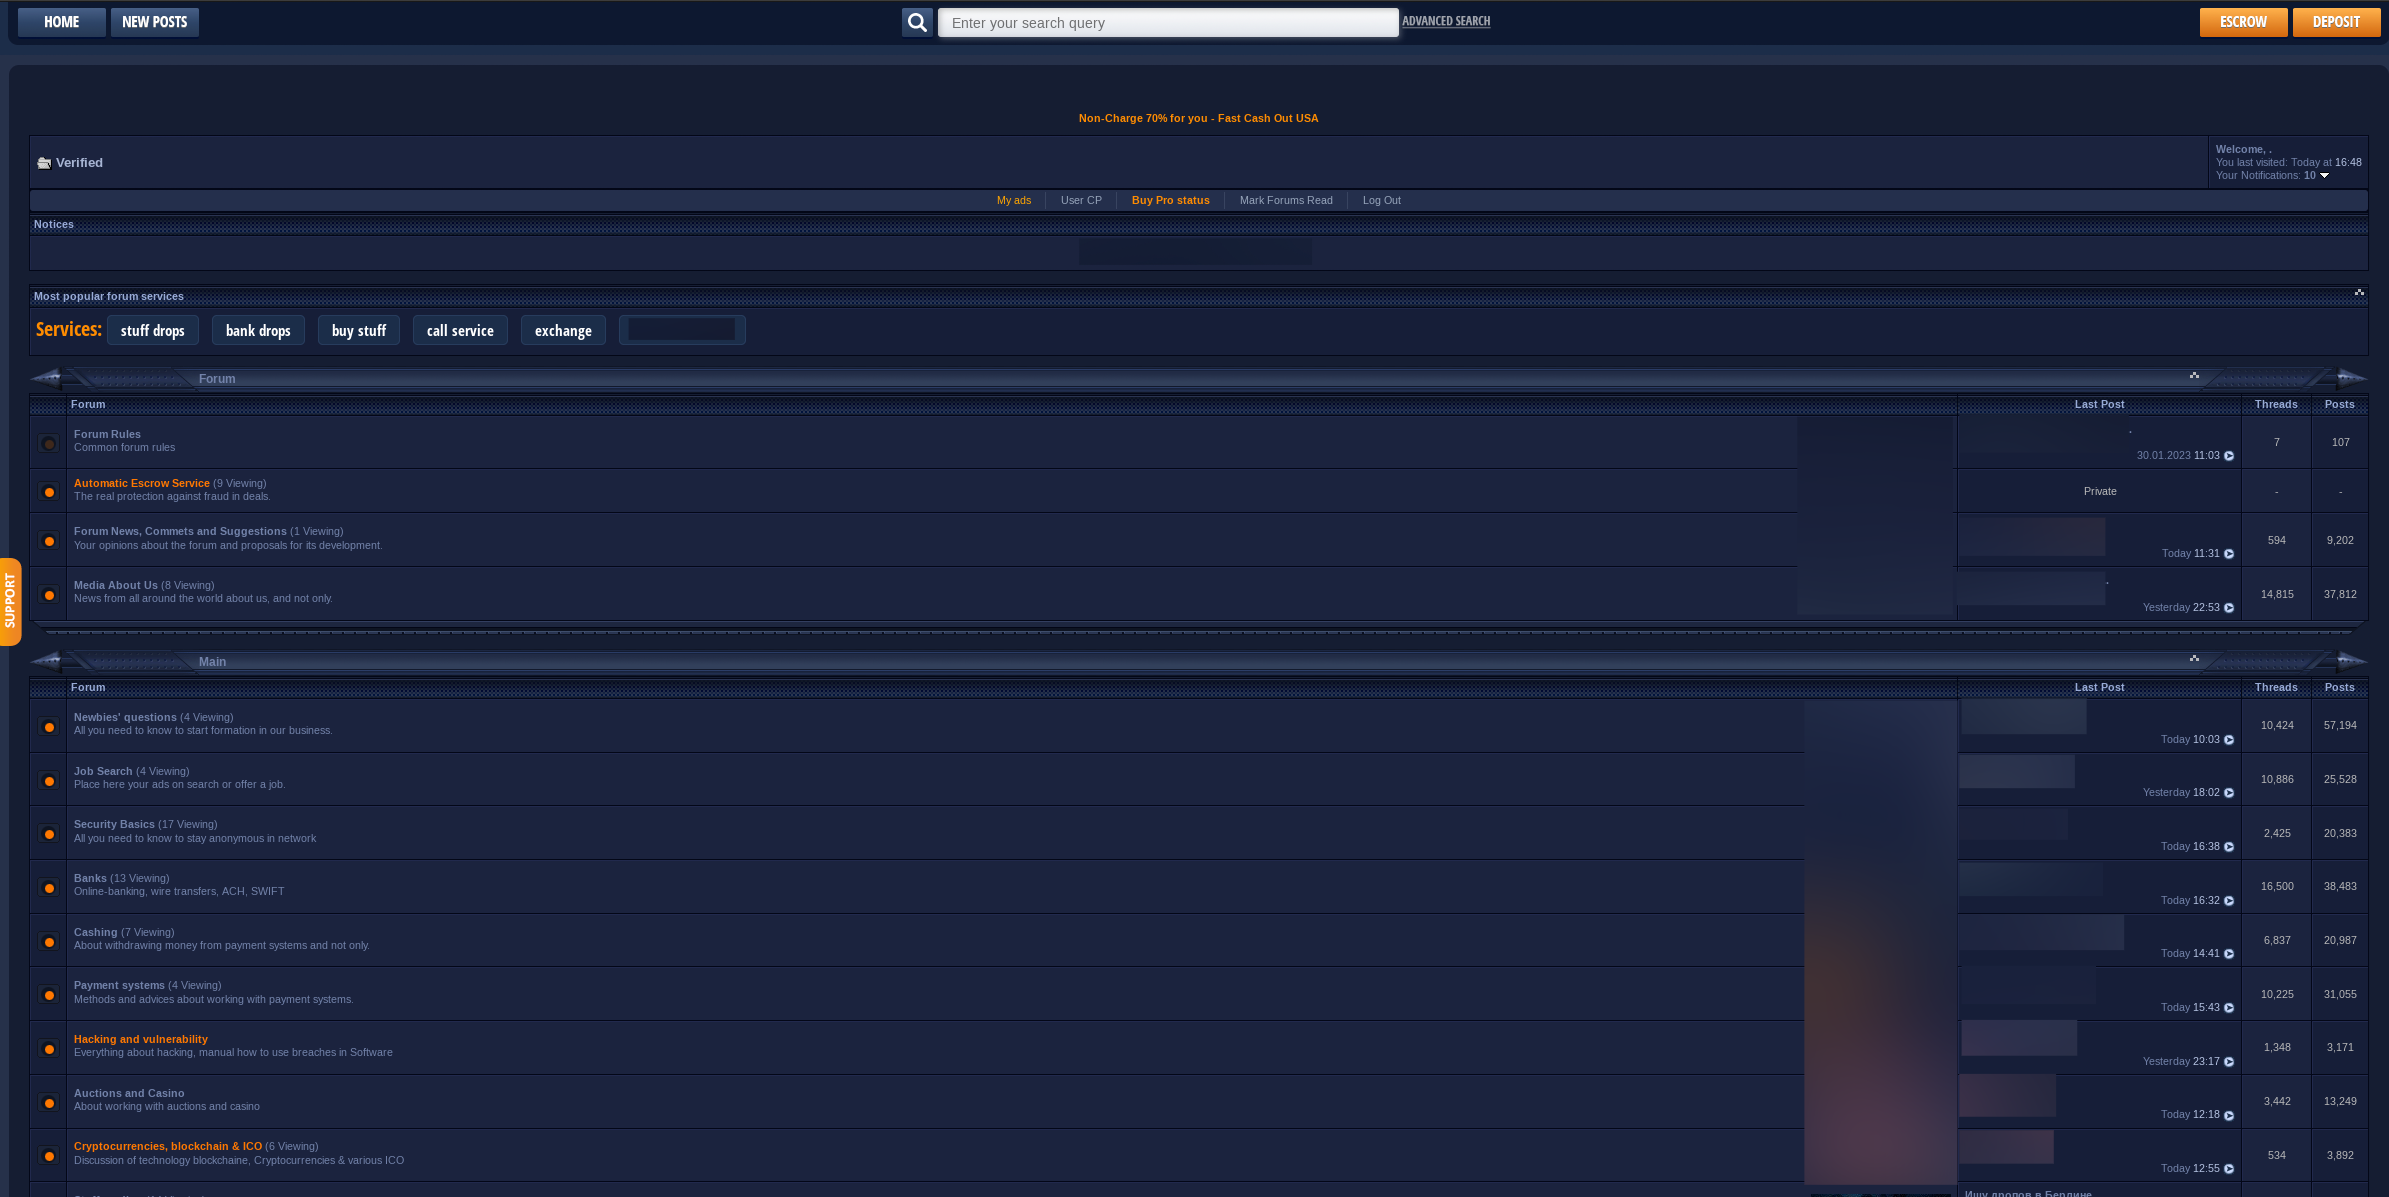 Screenshot of Verified forum. The background is navy The rest of the homepage has different sections labeled Notices, Services, Forum, and Main. 